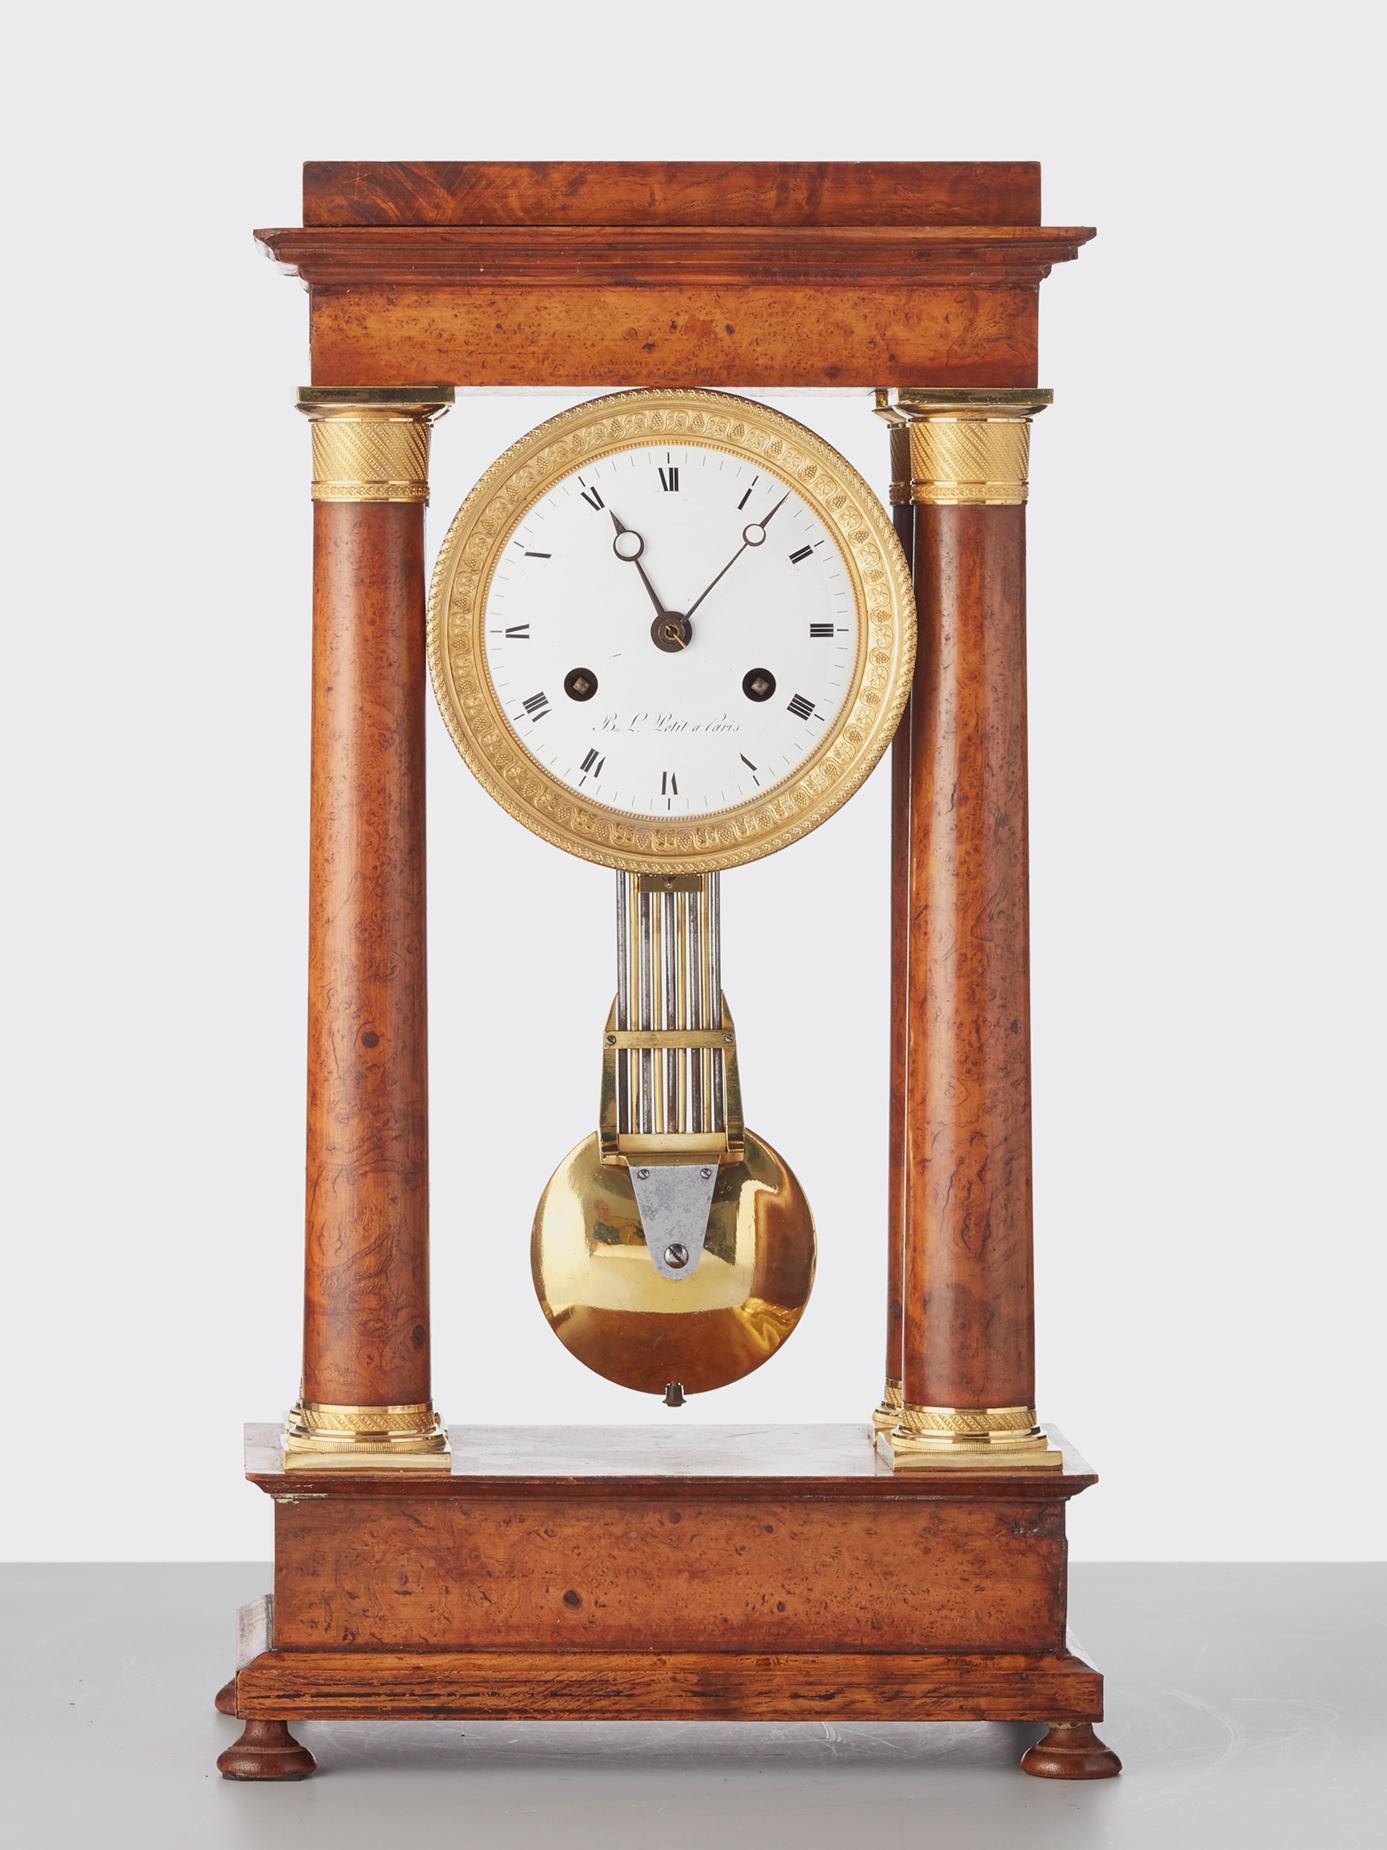 A nice good looking empire maple mantel clock with a so called compensated pendulum.

The striking 8-day movement with countwheel on bell. The nice pendulum on steel spring suspension. Anchor escapement with a grid from steel and bronze with lovely